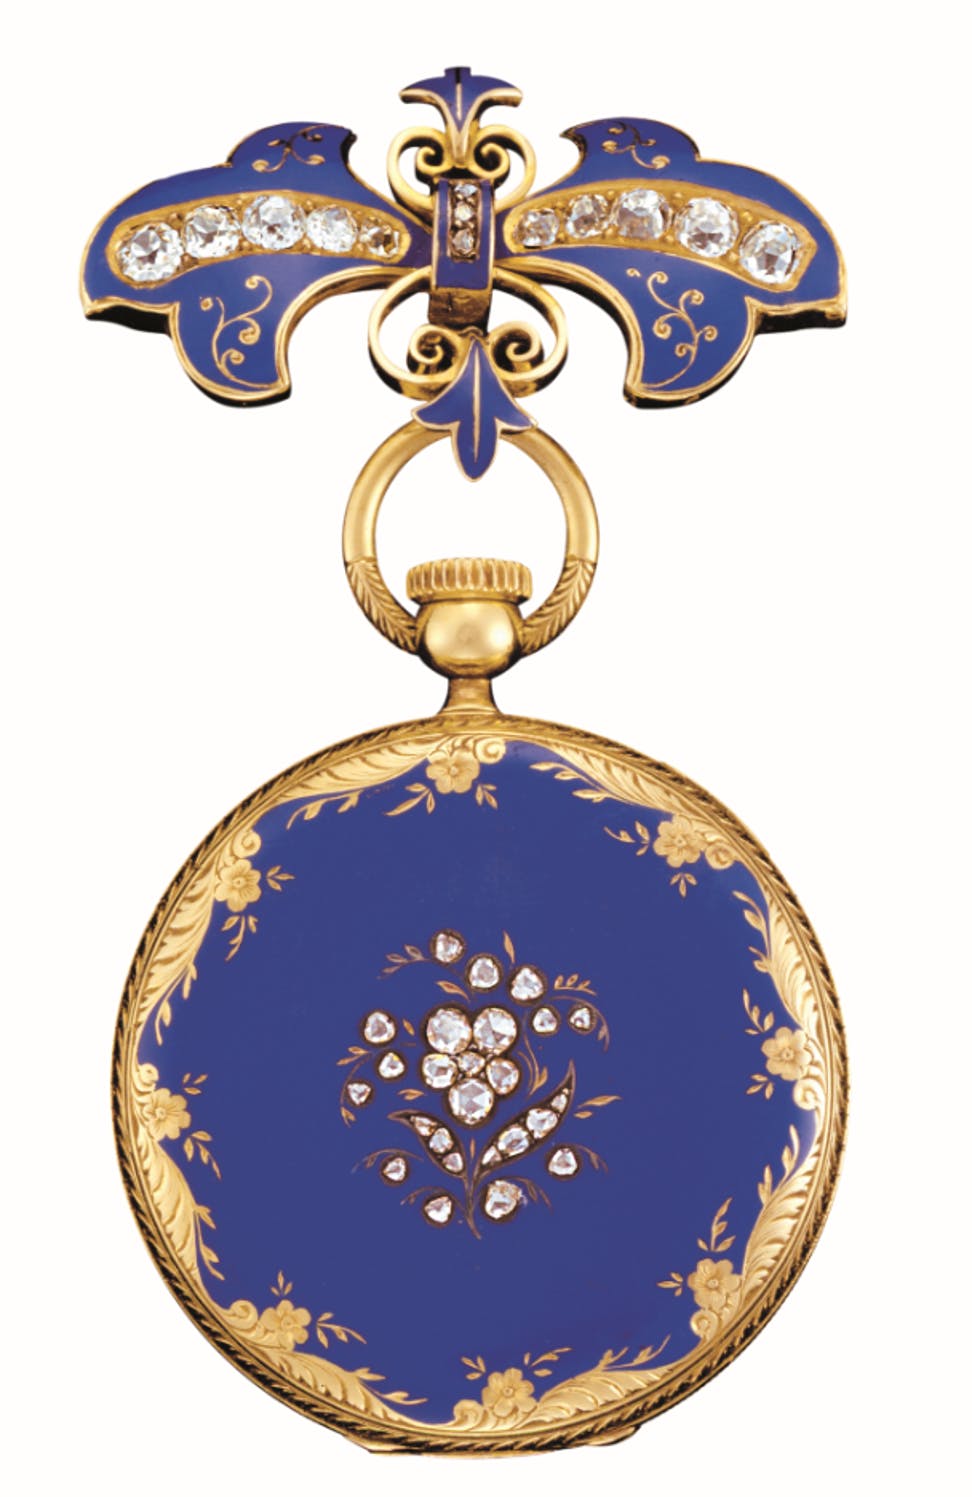 A Pocket watch hanging from a brooch, both in gold with blue enamel and diamonds set in a floral pattern.